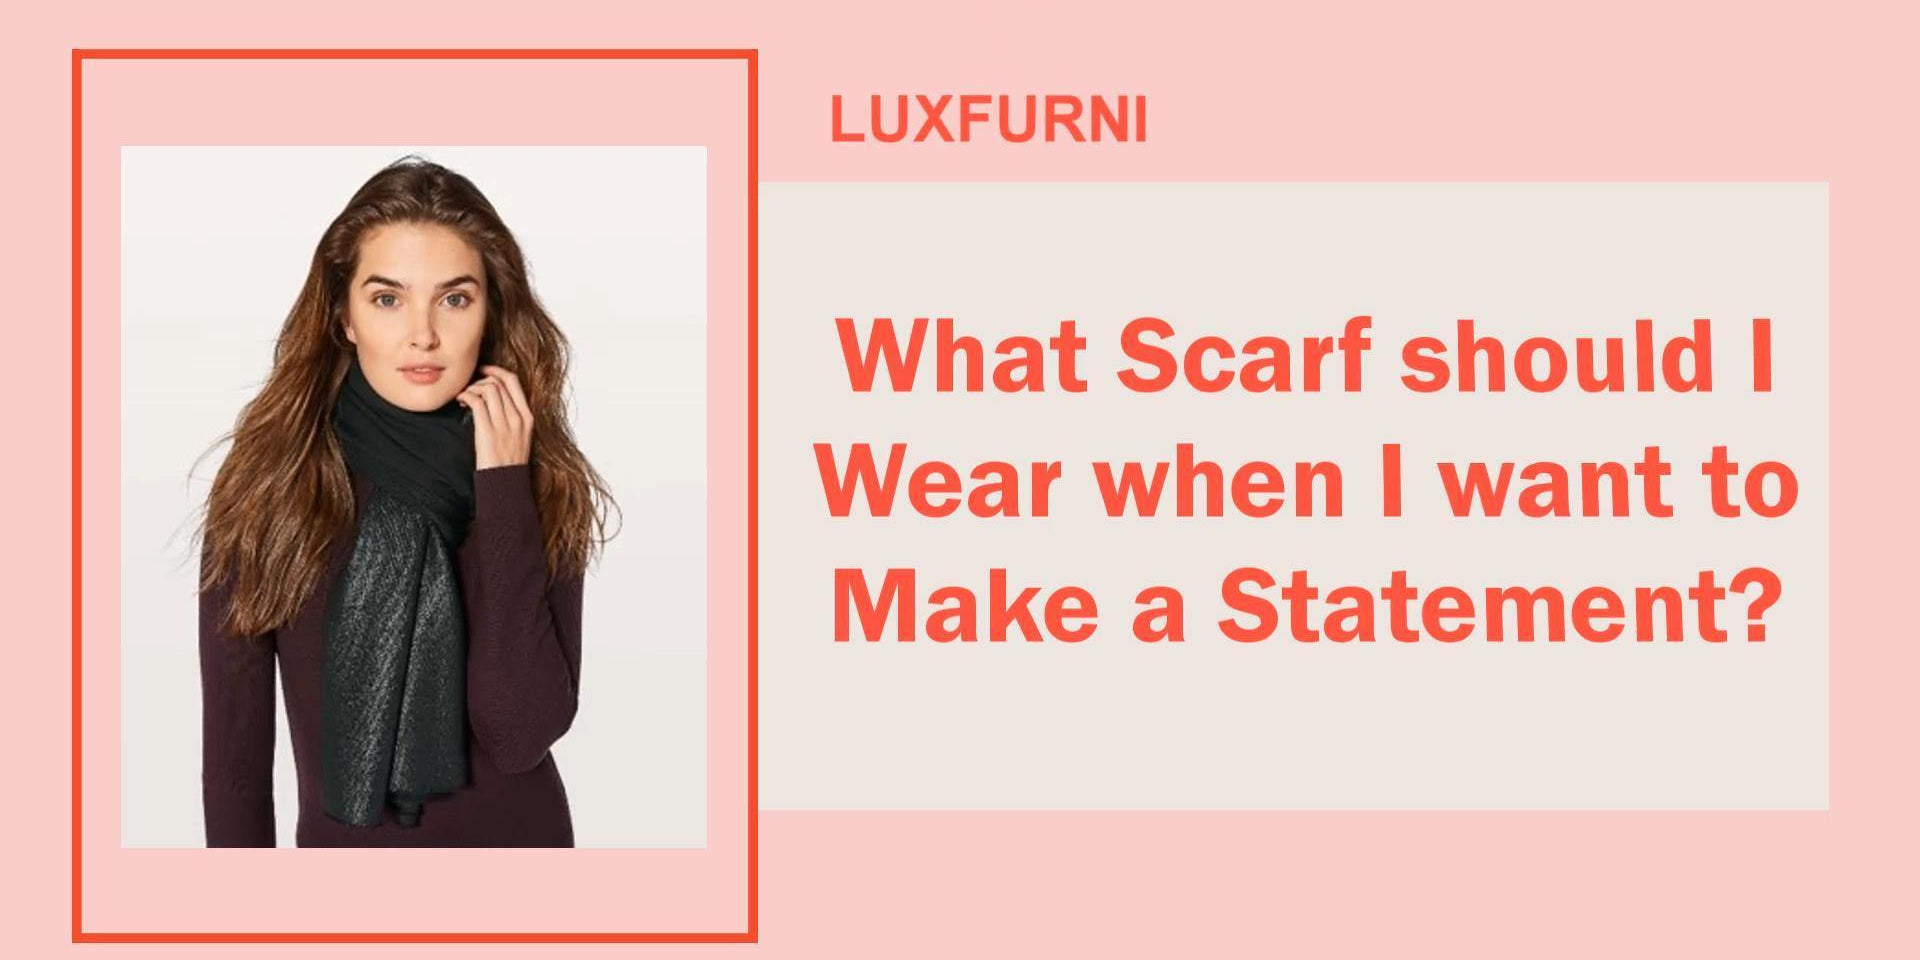 How to Choose the Right Scarf Episode 5 - When I want to Make a Statement - Luxfurni